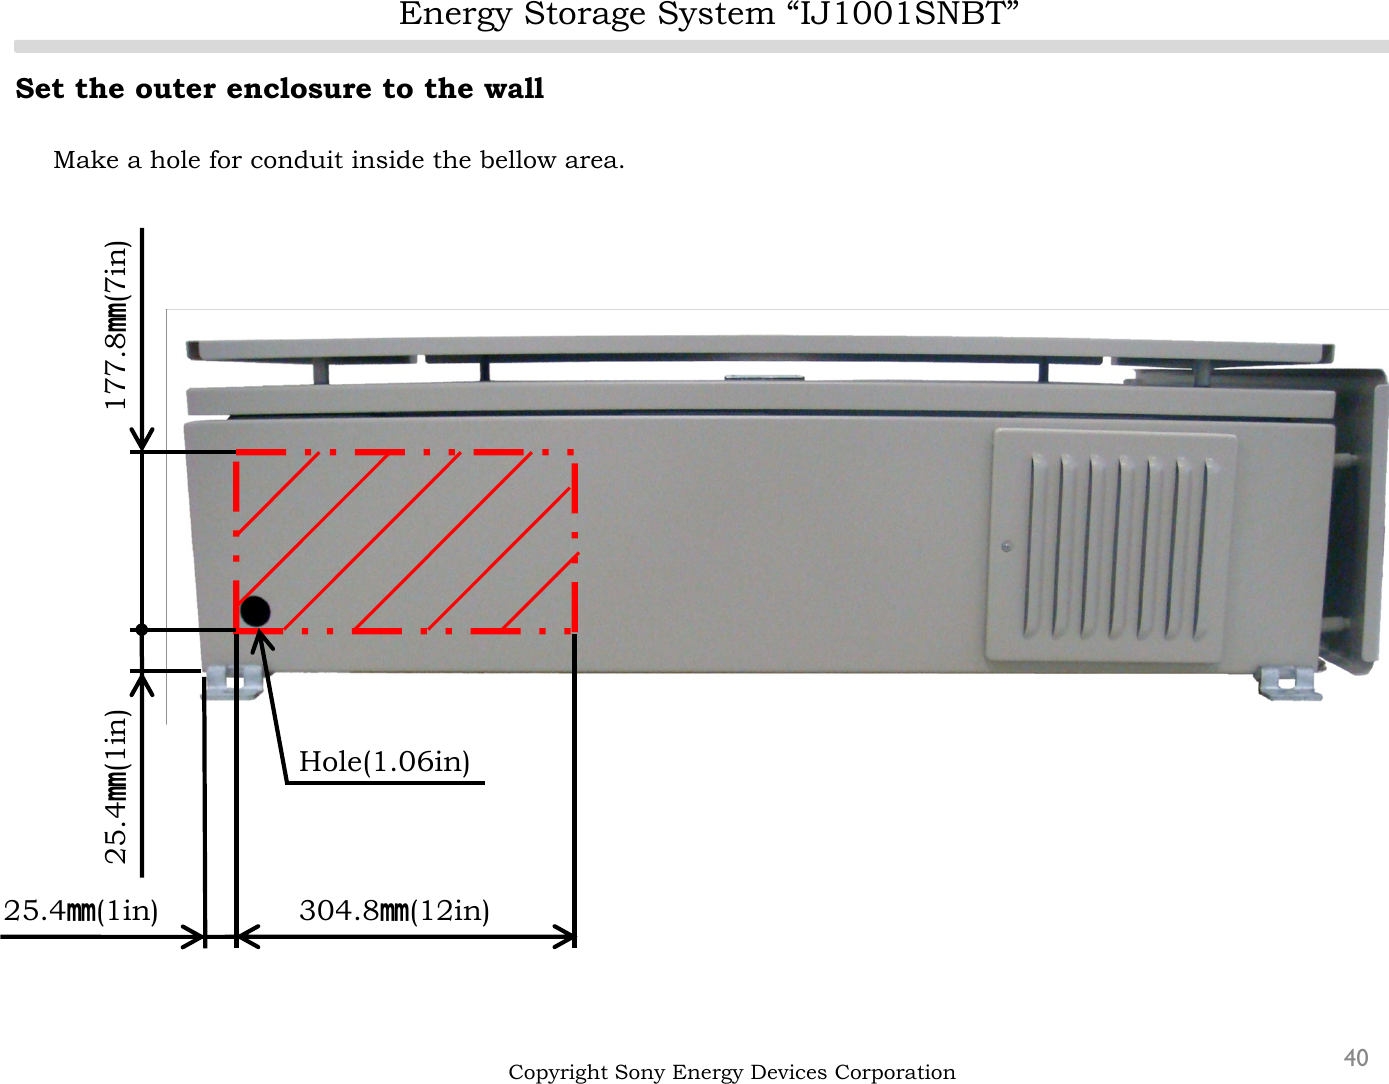 Energy Storage System “IJ1001SNBT”40Set the outer enclosure to the wallMake a hole for conduit inside the bellow area.Copyright Sony Energy Devices Corporation177.8㎜(7in)25.4㎜(1in)25.4㎜(1in) 304.8㎜(12in)Hole(1.06in)